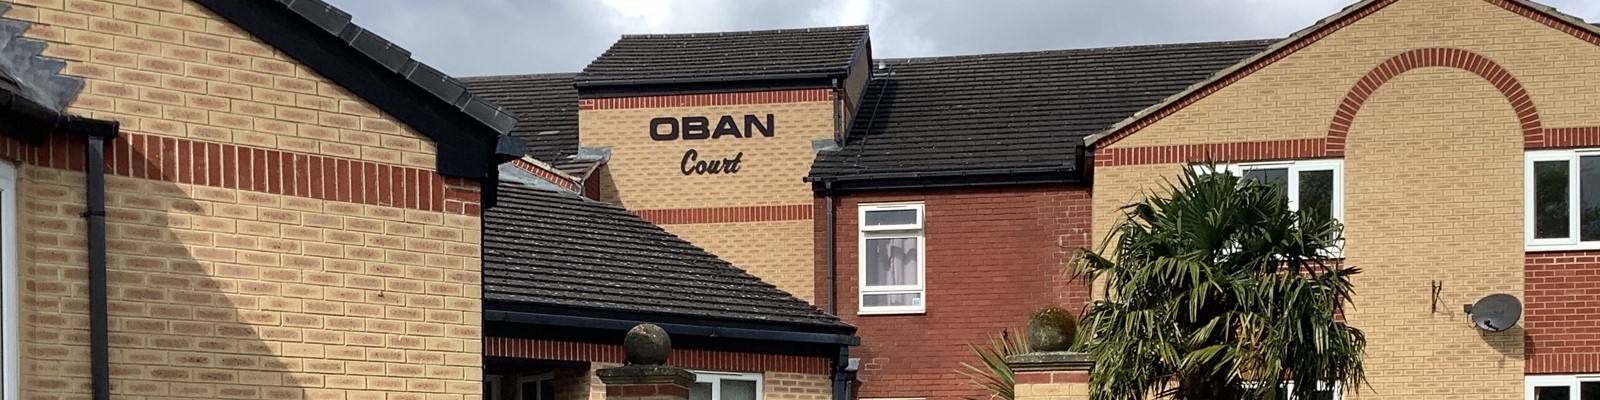 the front of Oban Court including the sign on the building